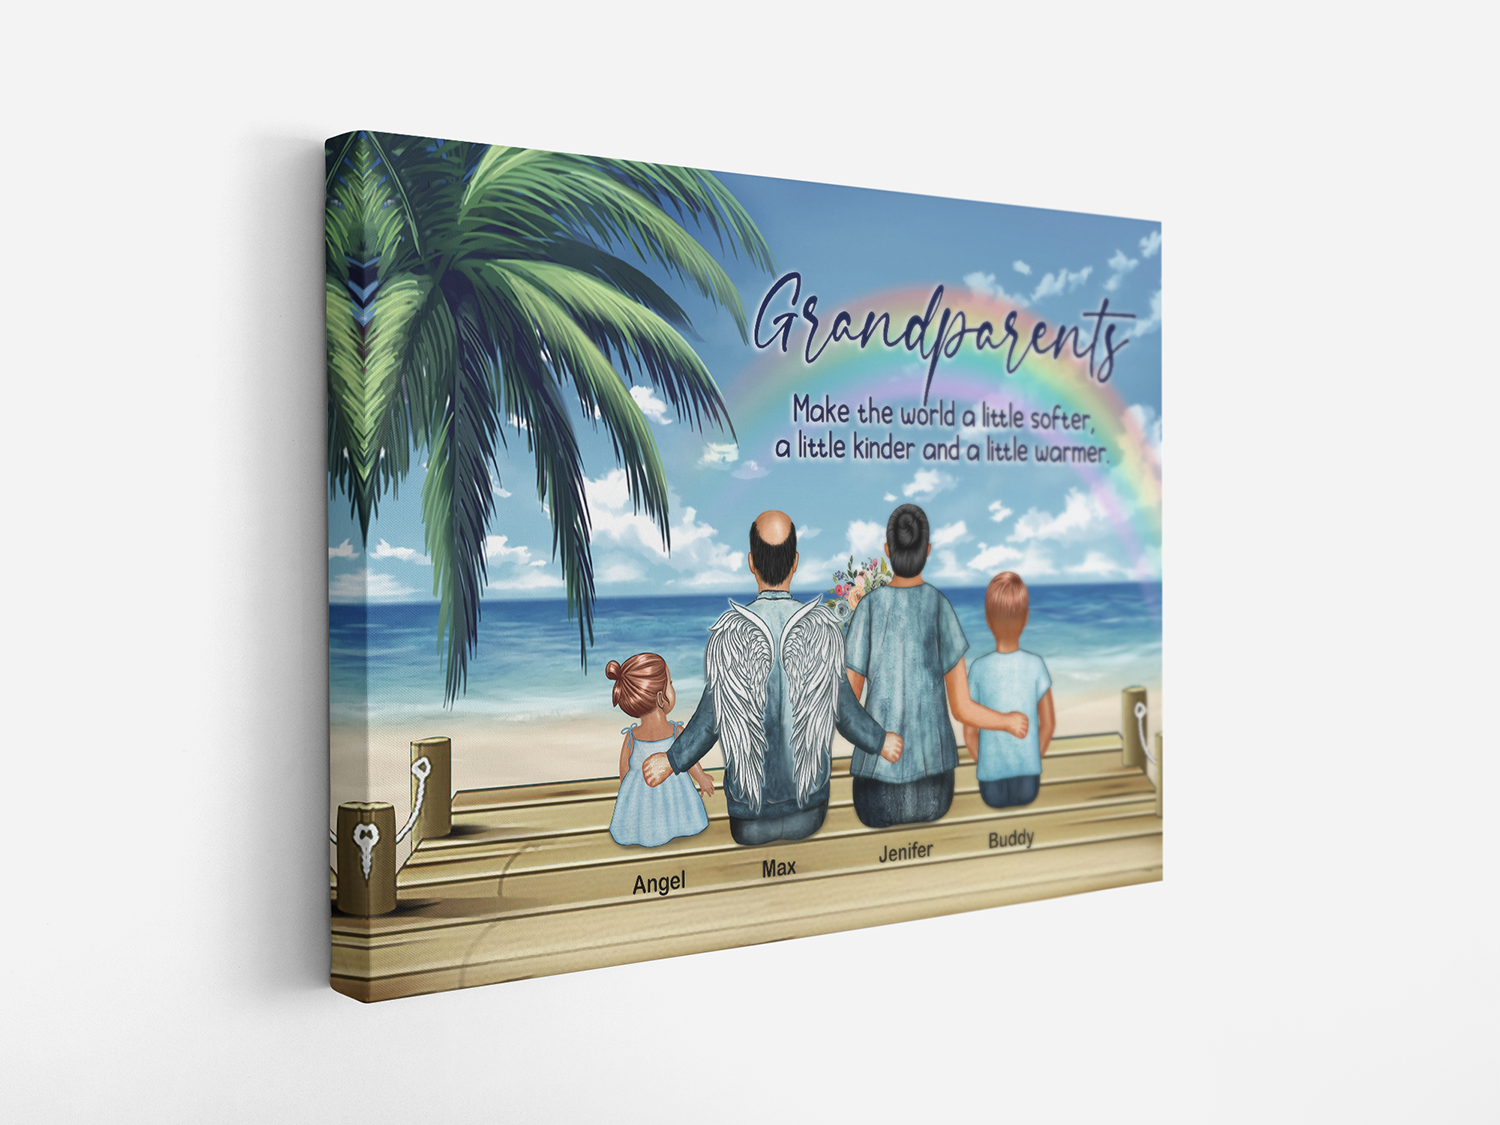 Personalized Grandparents Make The World A Little Softer, A Little Kinder, A Little Warmer Canvas Prints